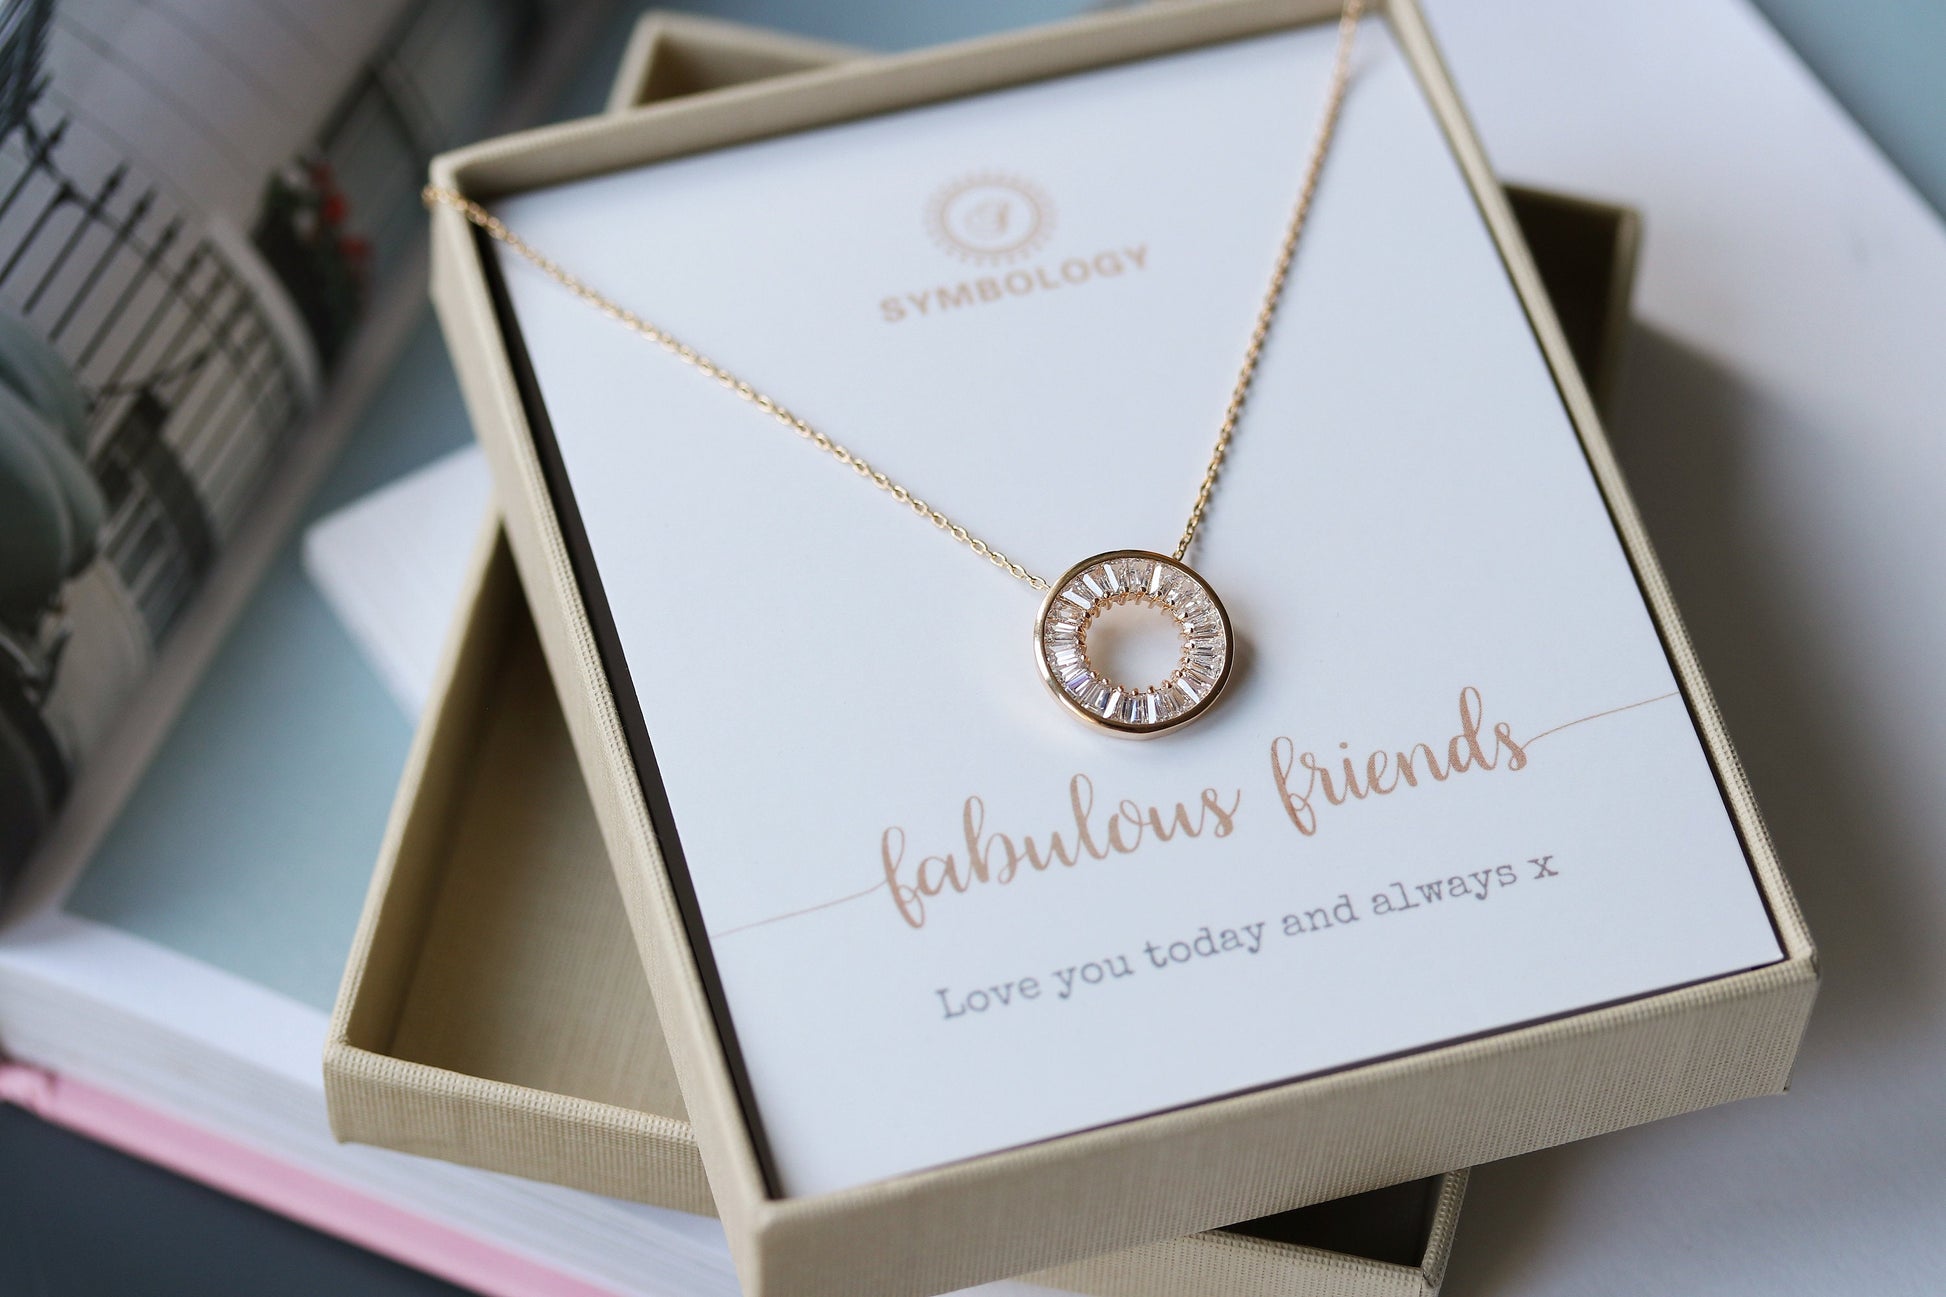 Gold CZ Pave Open Circle Friends Necklace / CZ Pave Circle Love Necklace / BFF Gift / Leaving Bestie Gift for Friend / Waterproof Necklace /